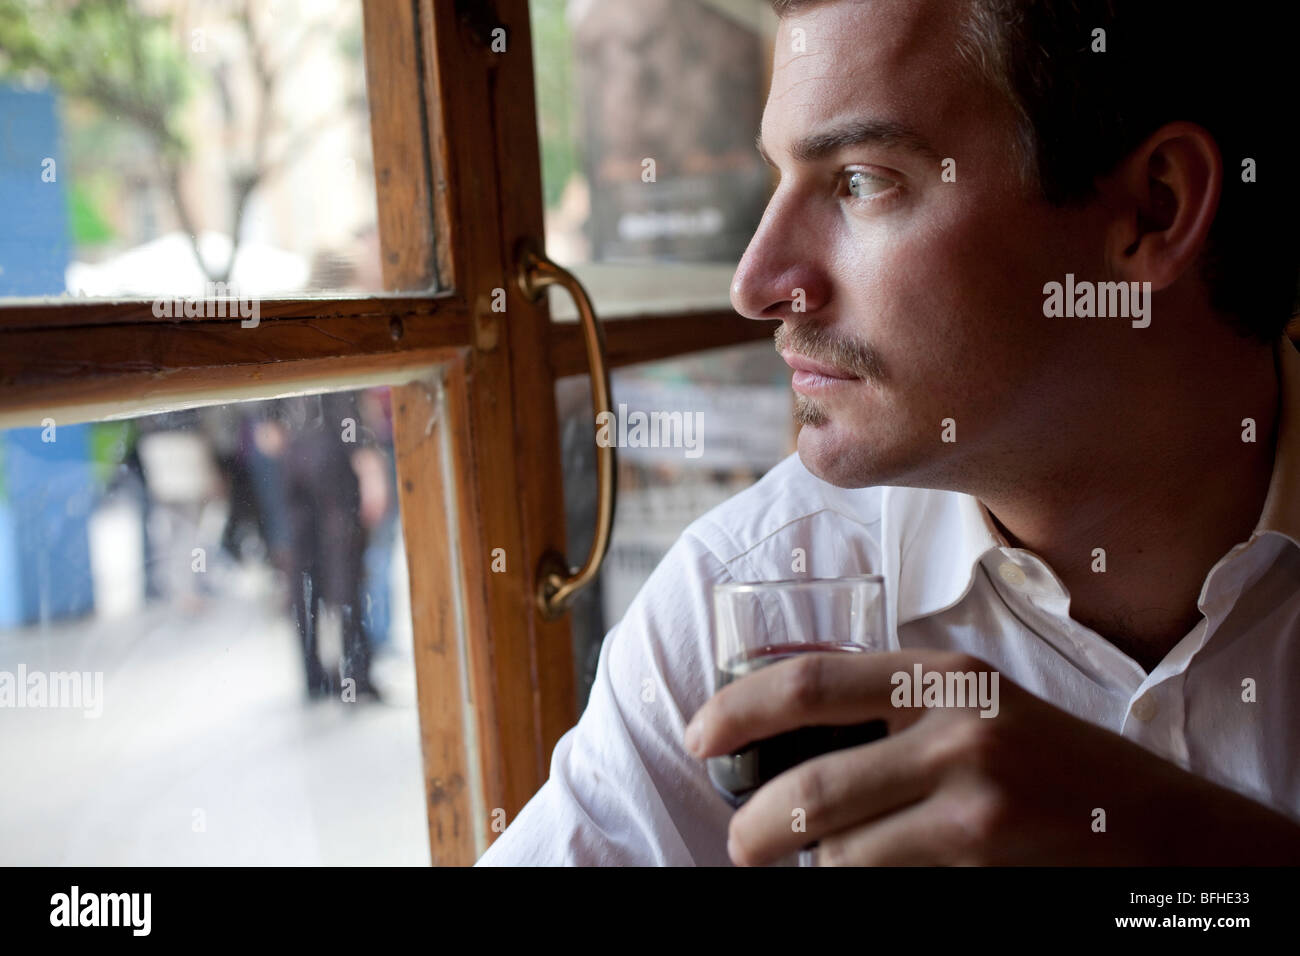 young man looking out the window holding a glass of wine Stock Photo